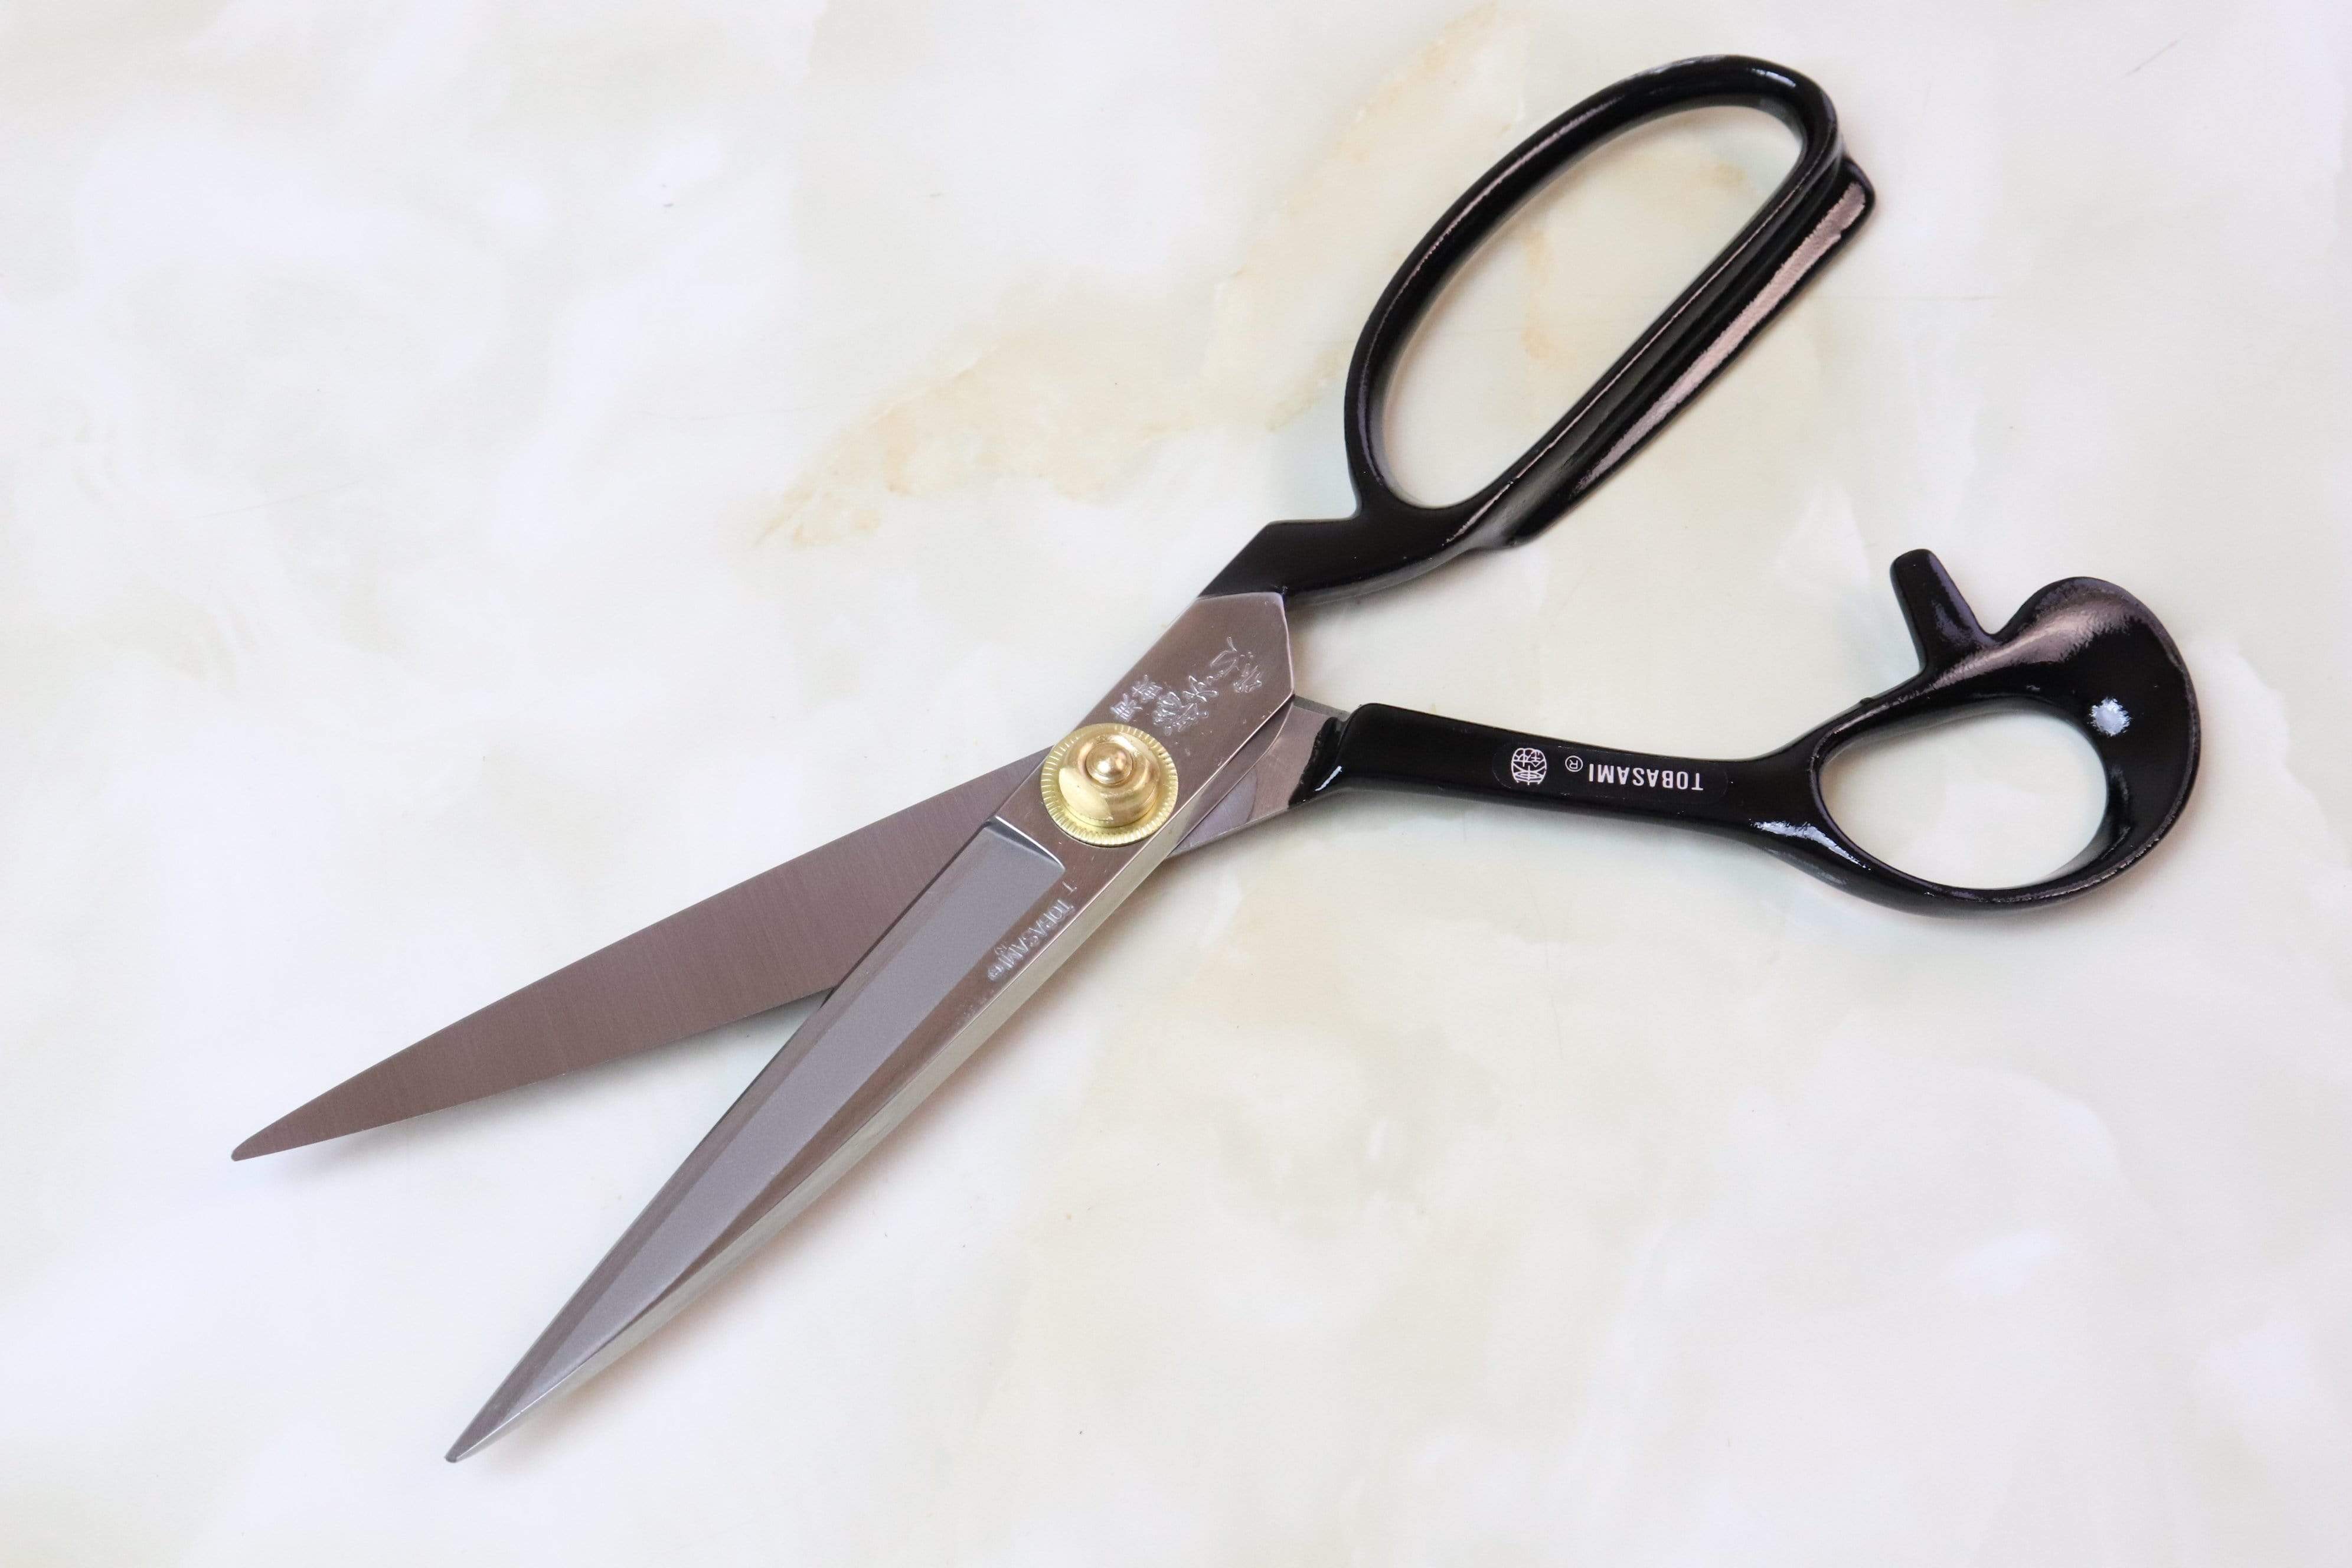 6 Mini Small Scissors All Purpose Stainless Steel - Tailoring